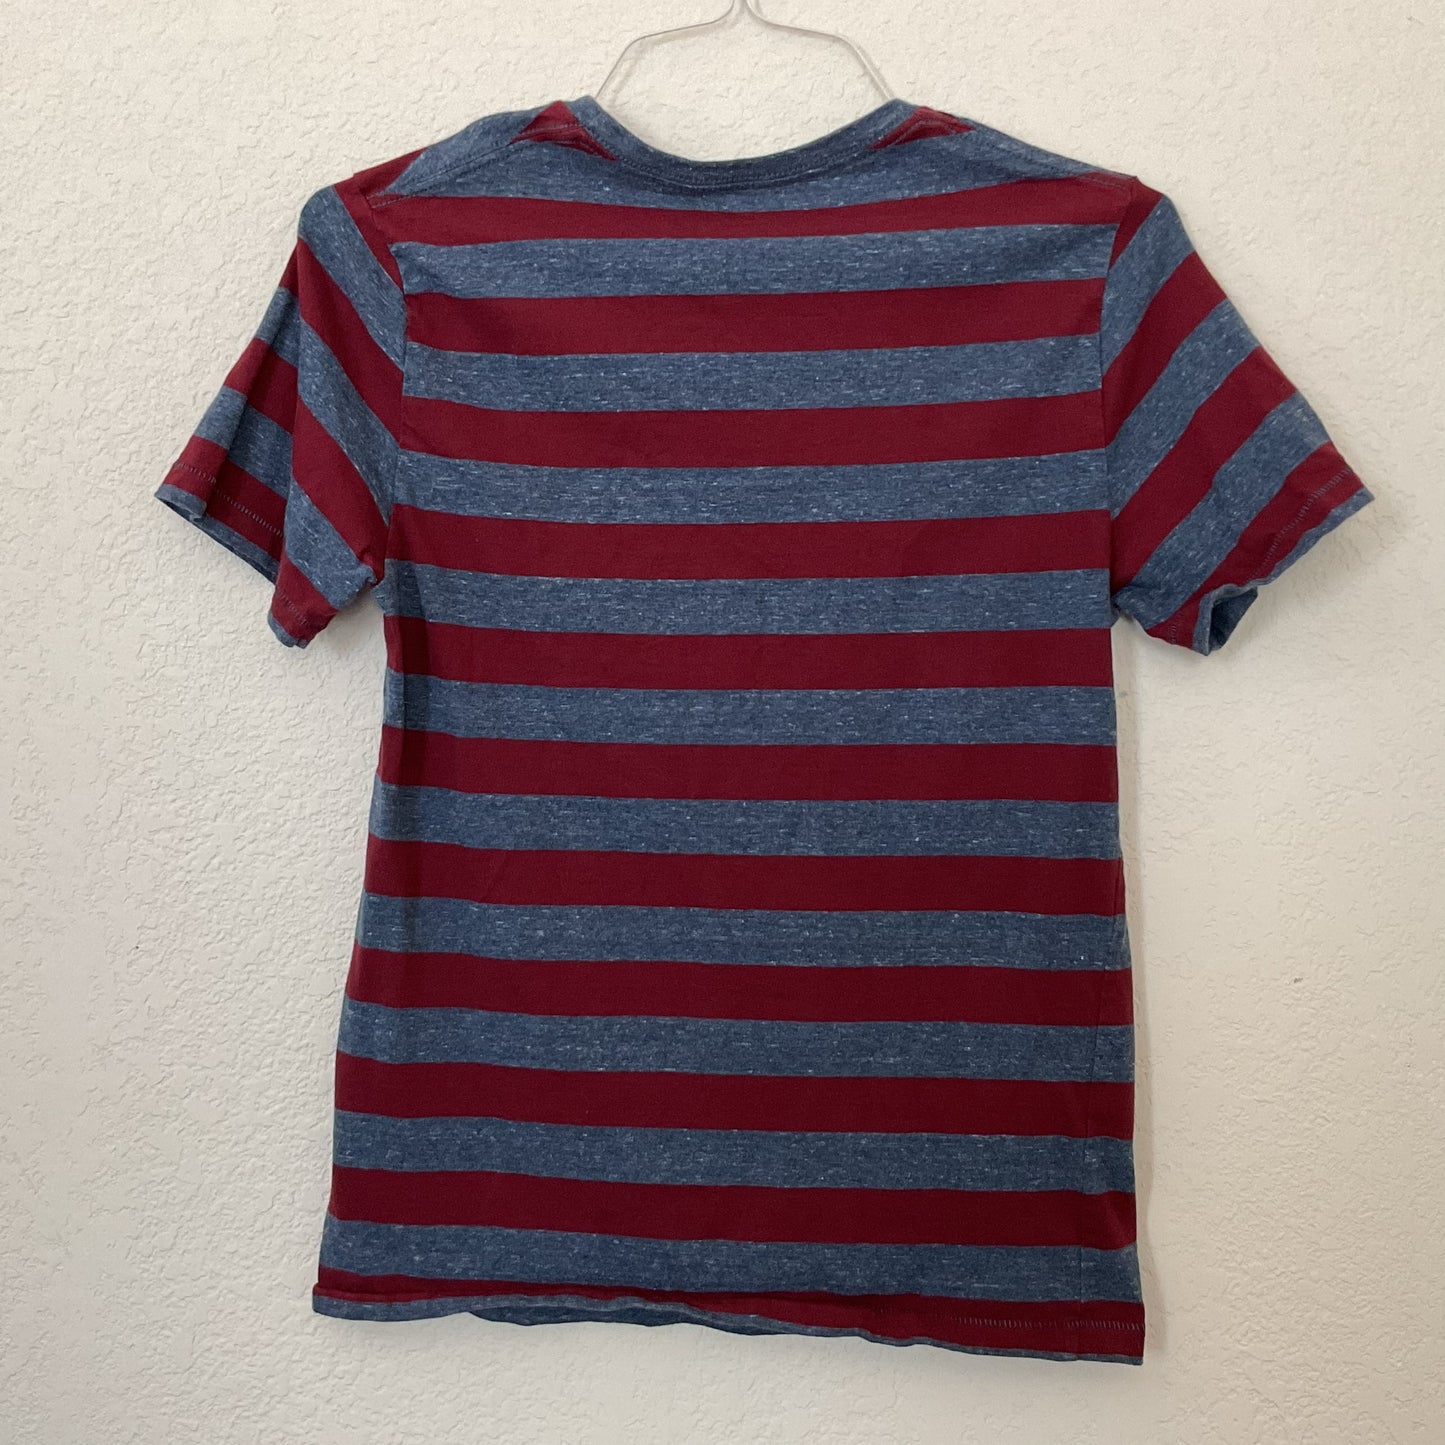 Old Navy Boys Stripped T-shirt Size S(8/10).